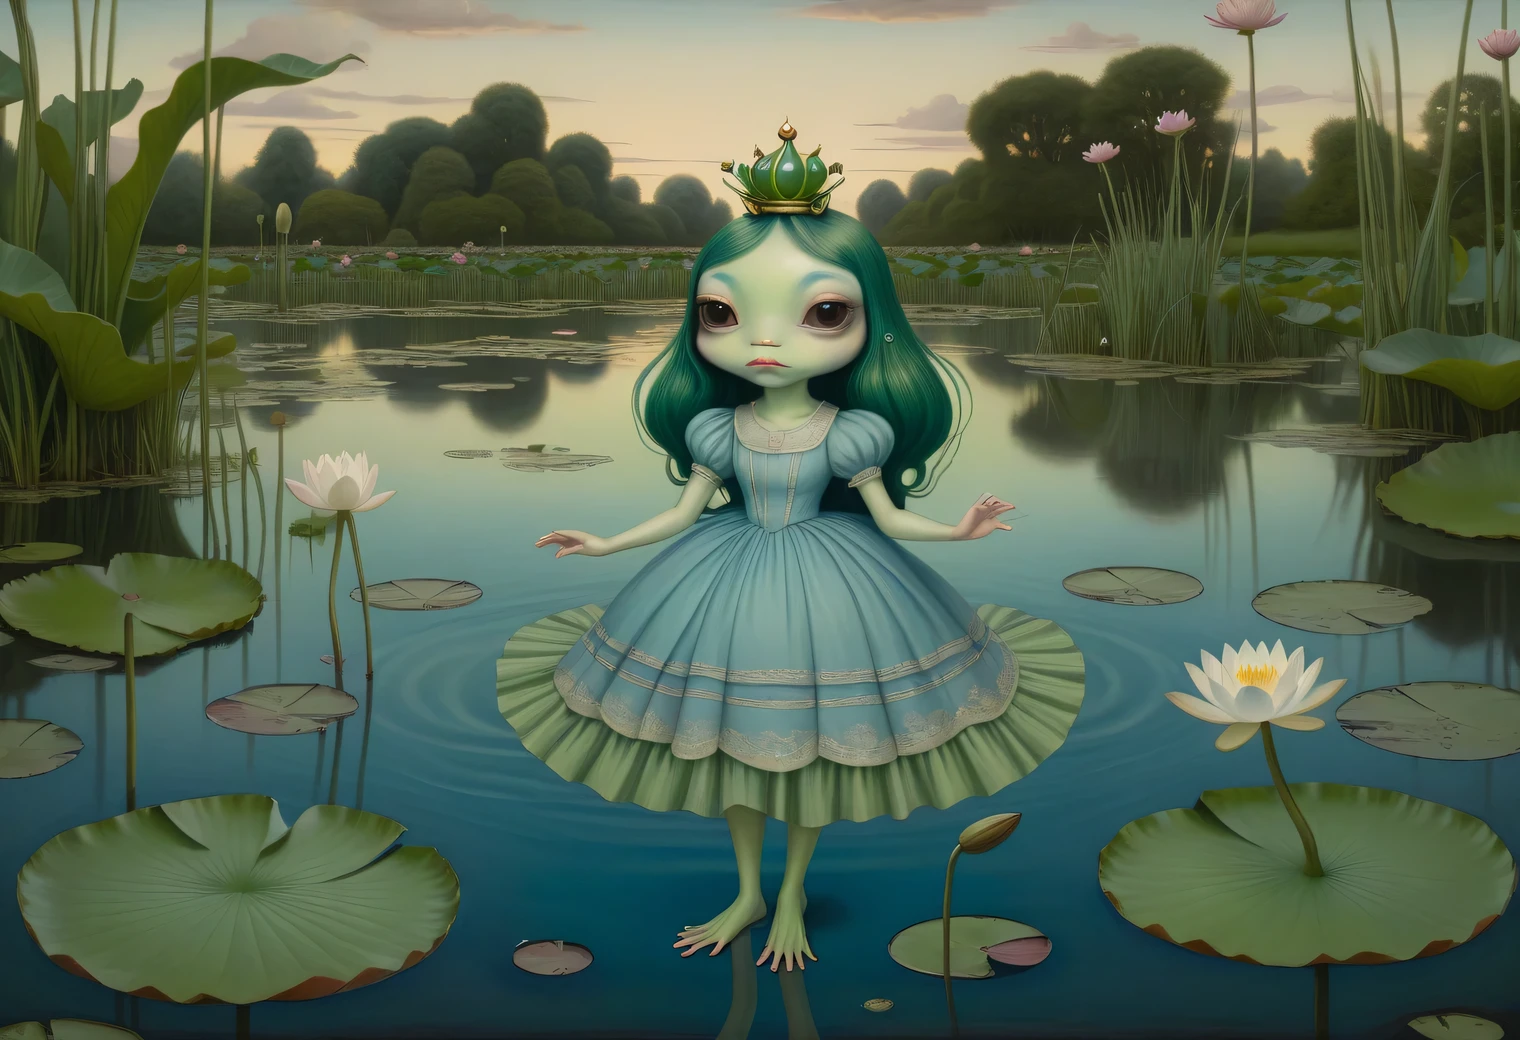 a painting on craft paper in the style of artist Mark Ryden, a strange alien anthropomorphic frog with long green hair in a blue dress stands on a sheet of evening pond water lilies, evening pond surface, water lilies and reeds, an alien anthropomorphic frog is shown in detail, evening pond, full compliance with the style of Mark Ryden, high resolution, Mark Ryden style page